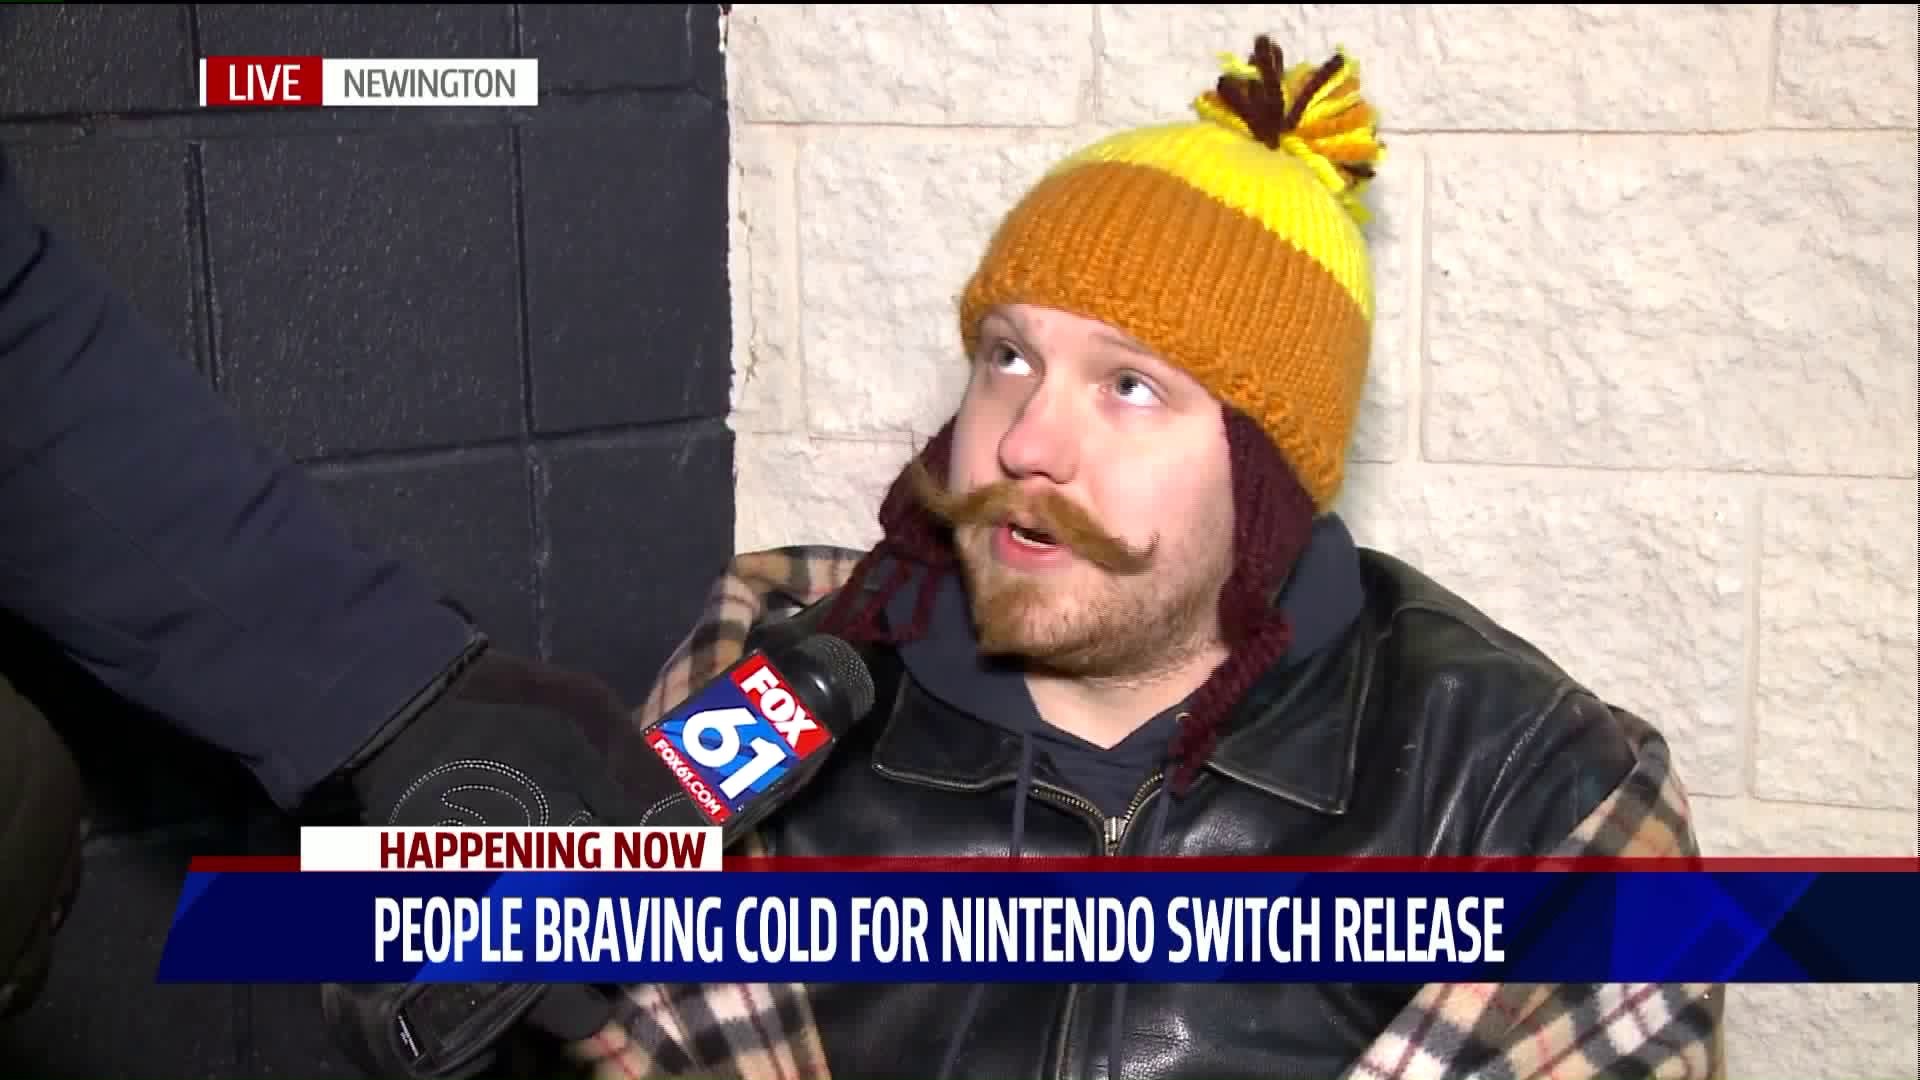 Braving the cold for the Nintendo Switch